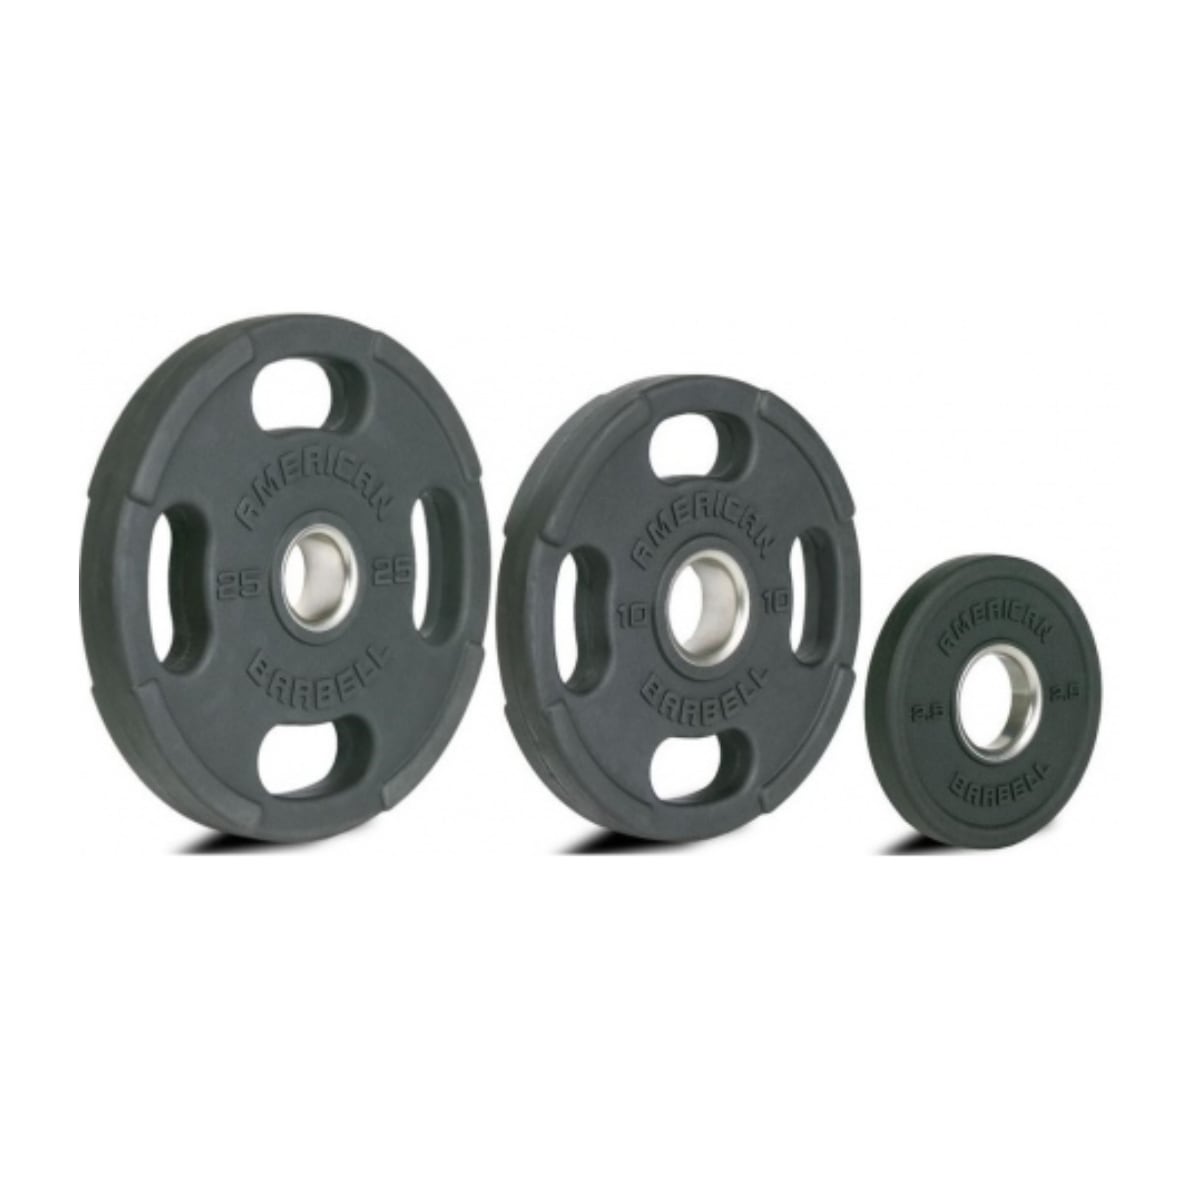 American Barbell Olympic Rubber Plate 1,25 - 25 kg